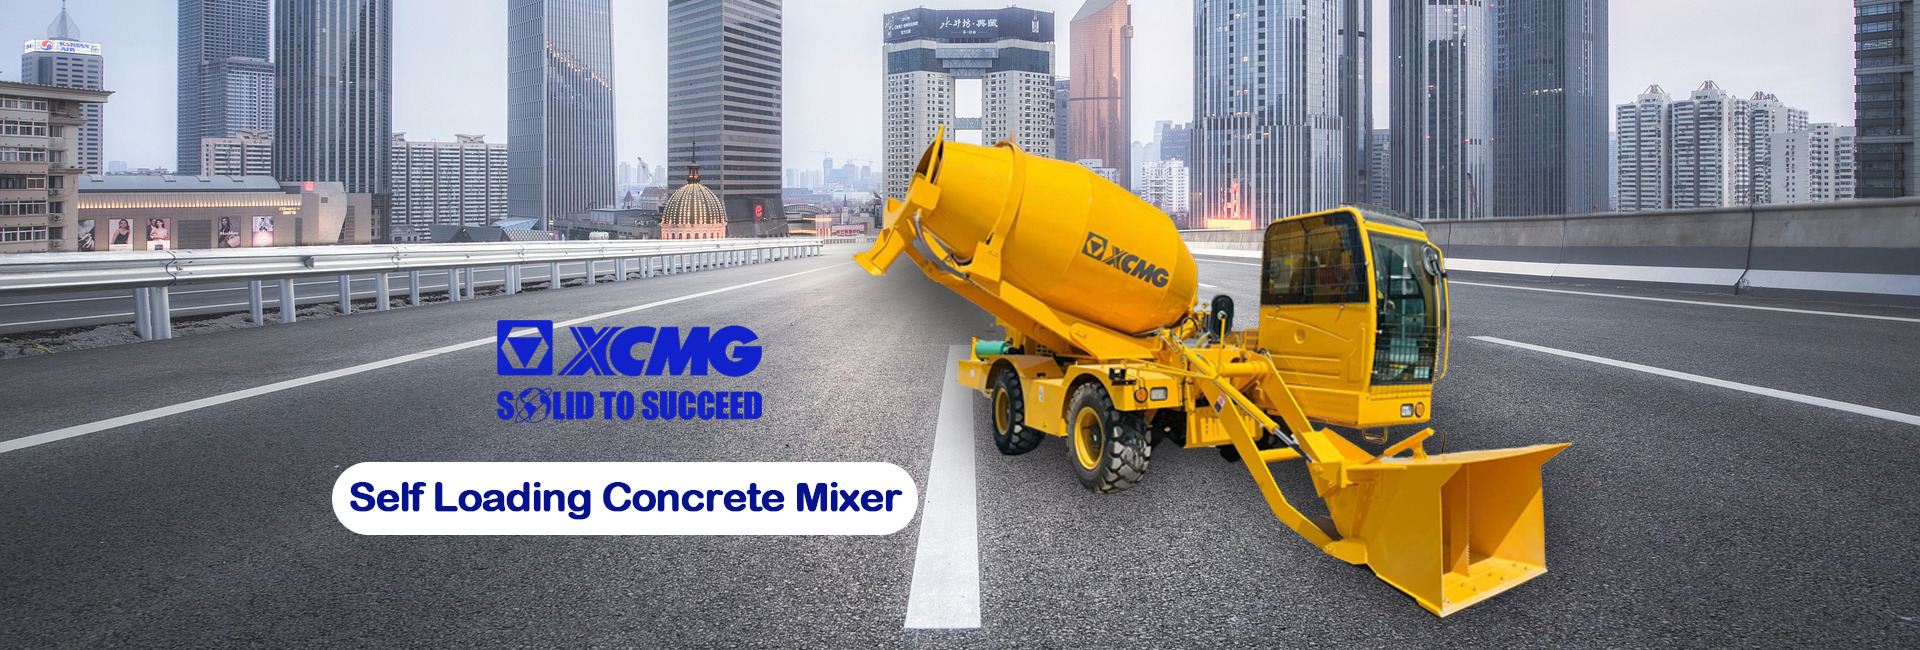 XCMG E-commerce Inc. - Construction machinery WIRTGEN undefined: picture 1